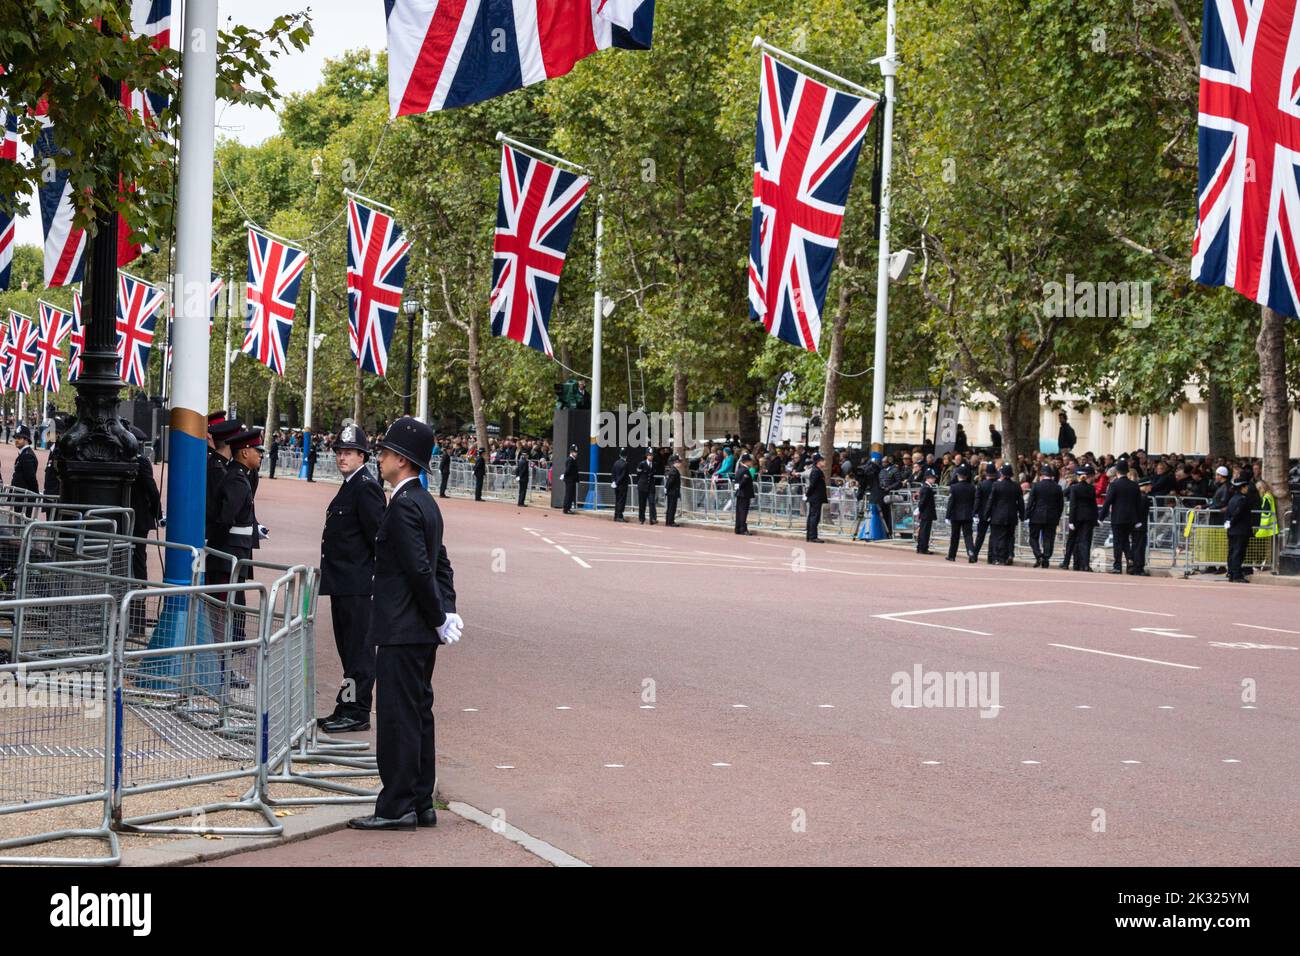 Police officers lined up on the Mall for the Queen Elizabeth II funeral procession in London following the Queen's death, England, United Kingdom Stock Photo